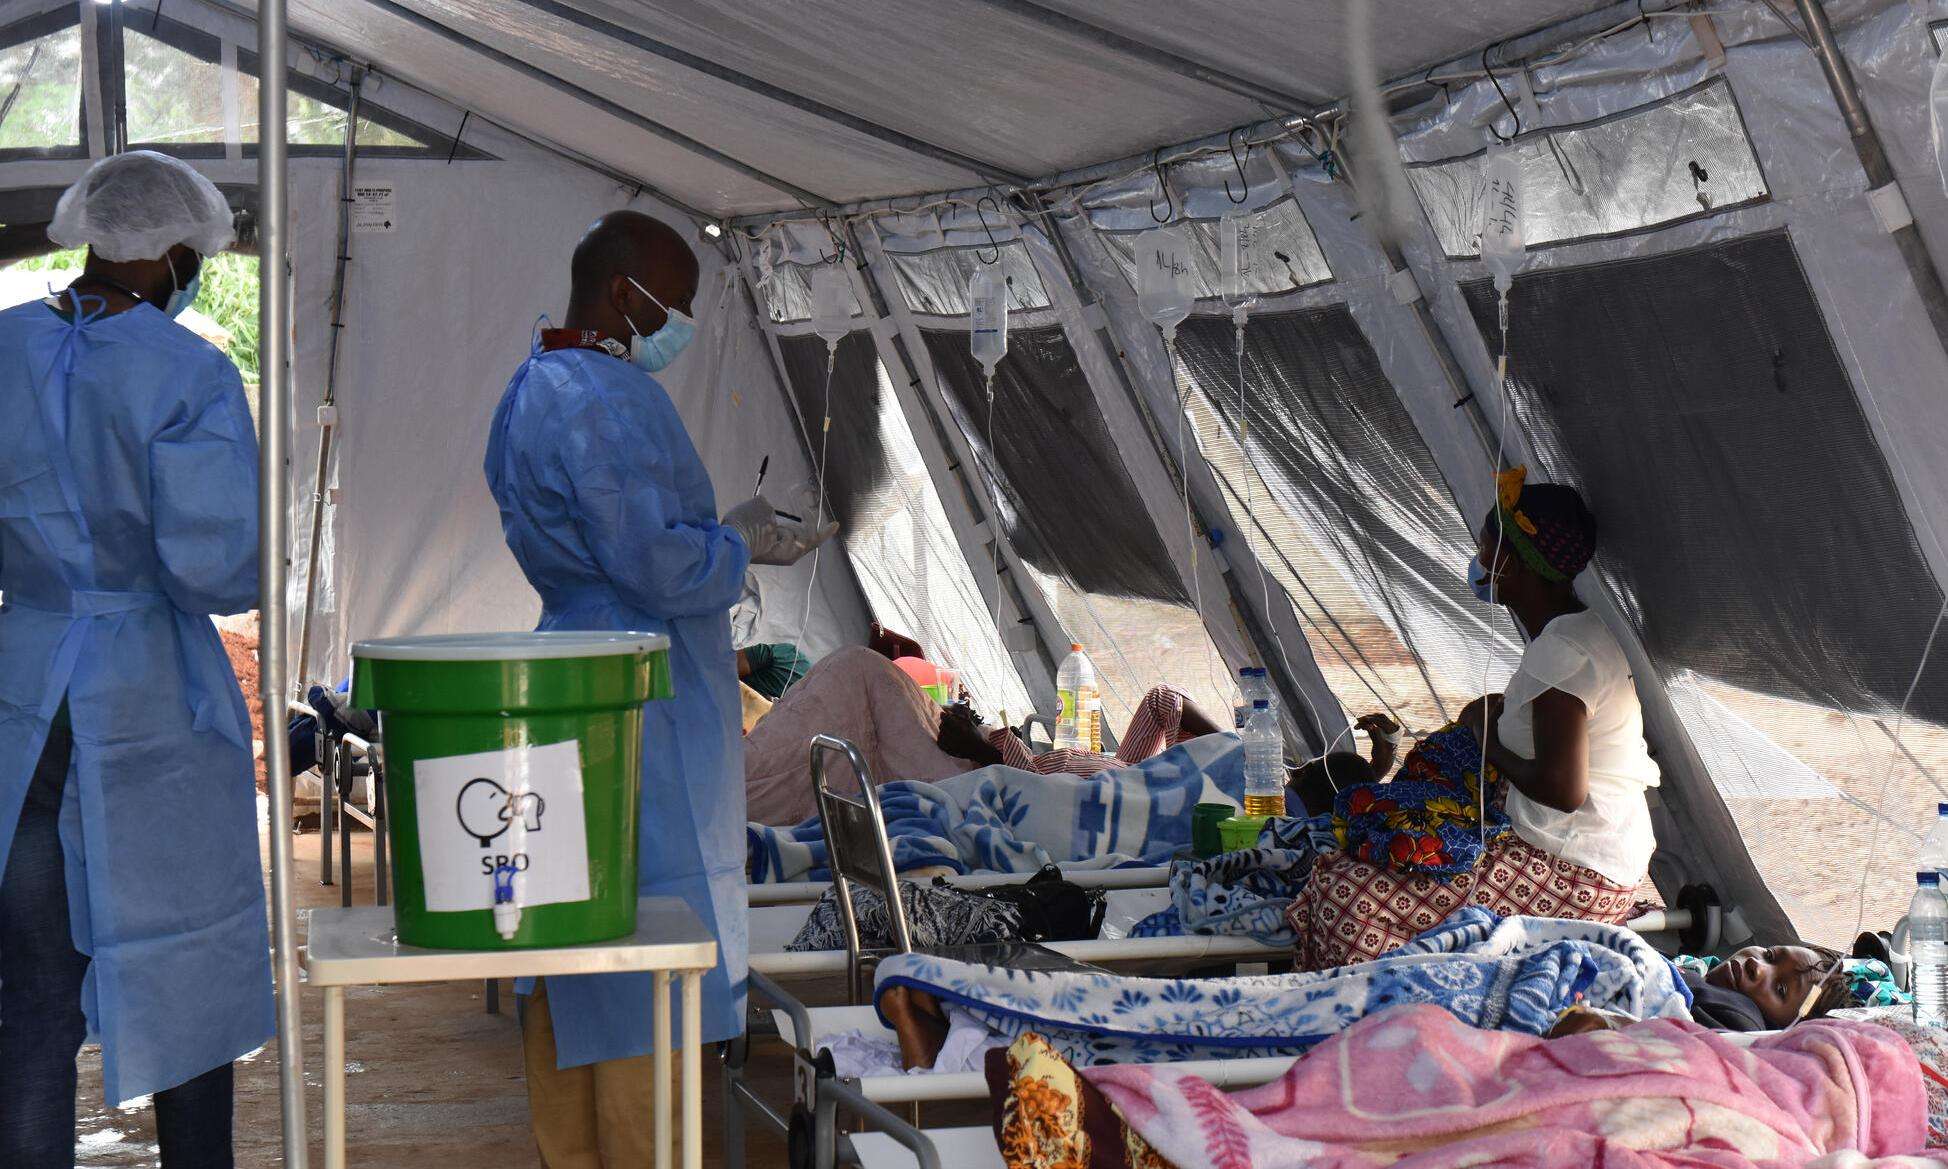  MSF helps contain cholera cases after surge in country’s north